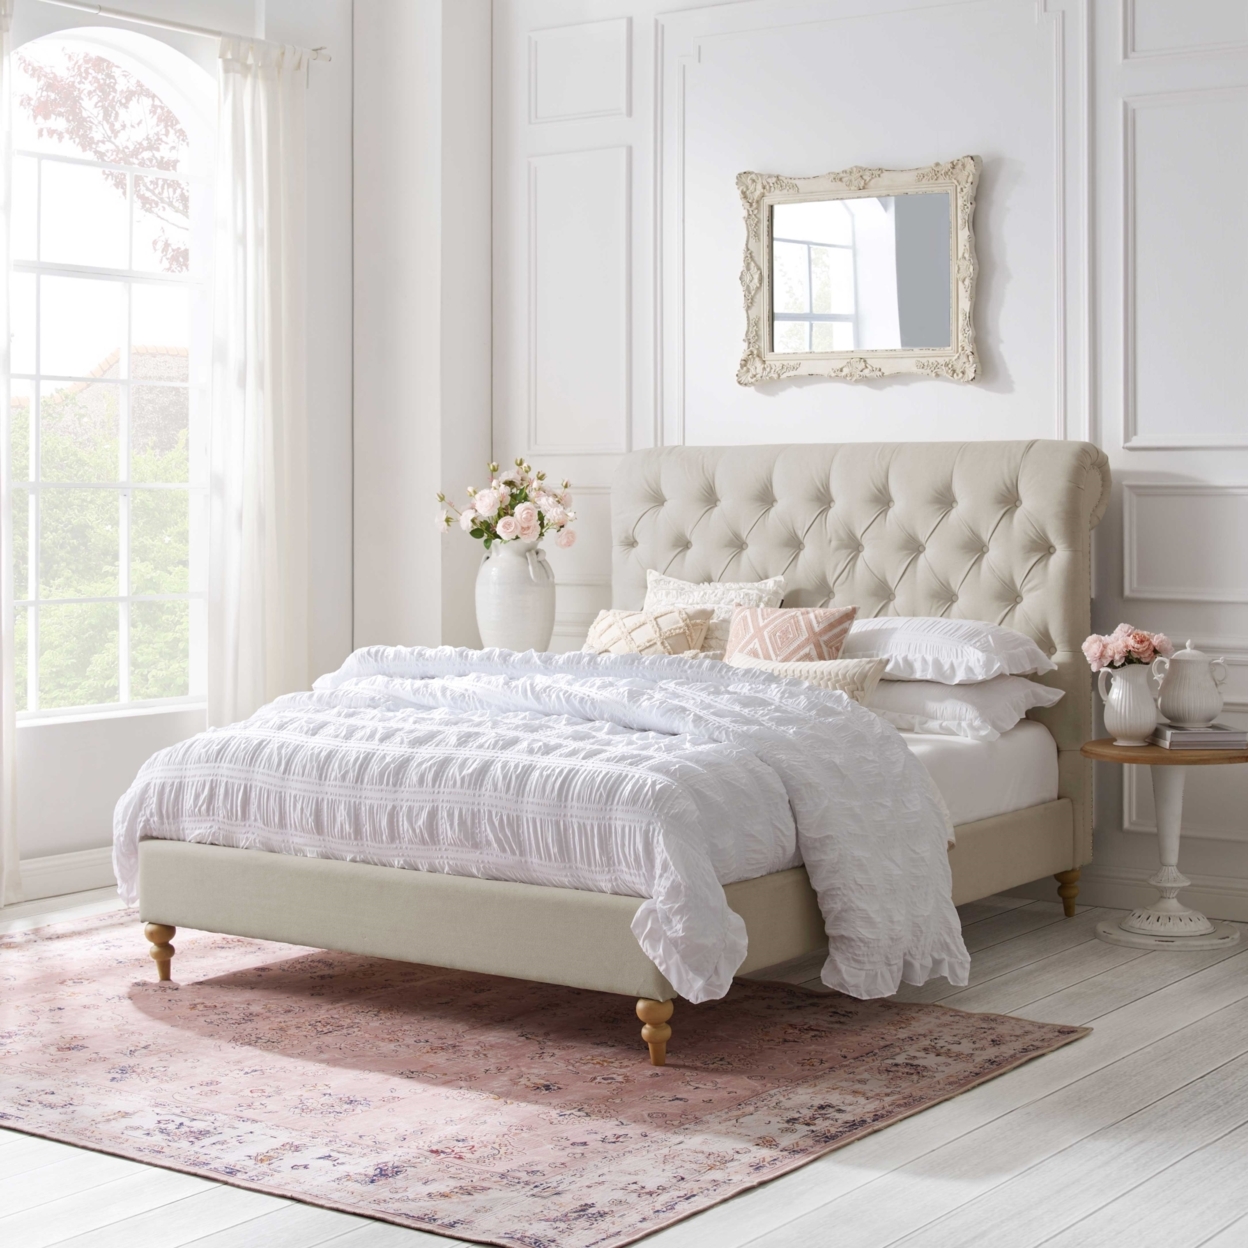 Kailynn Bed-Rolled Top Button Tufted-Nailhead Trim-Slats Included - Cream White, Queen